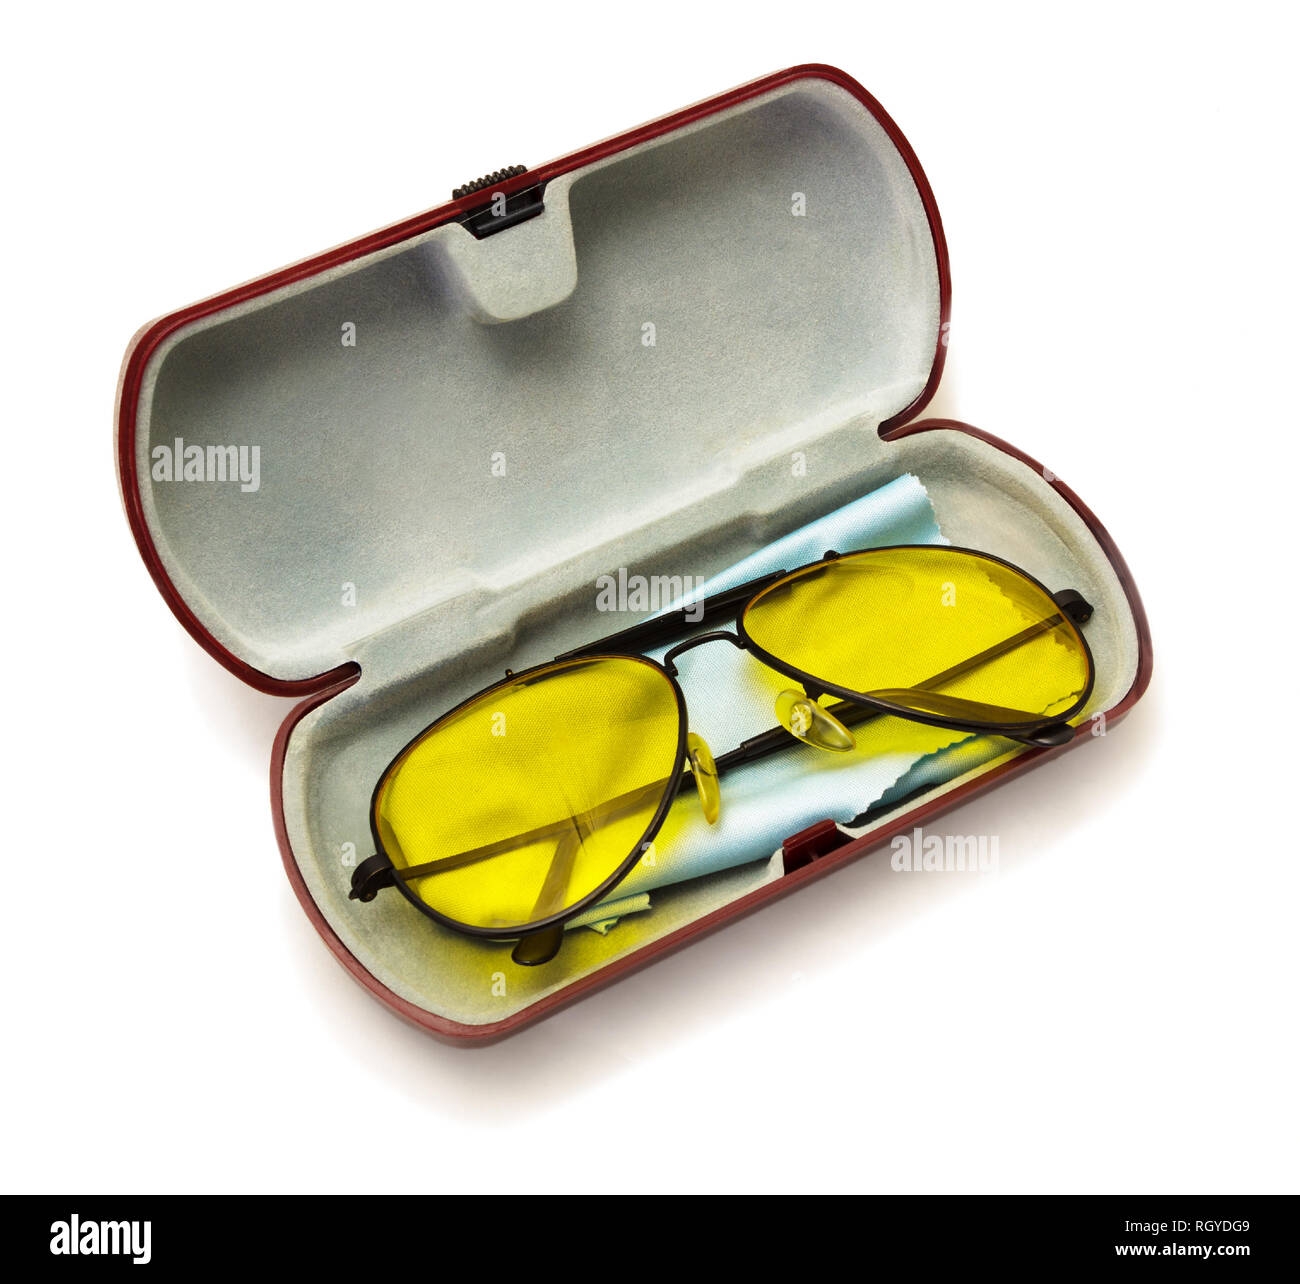 Anti-glare yellow glasses for driver with polarized polymer lenses in its case on white background Stock Photo